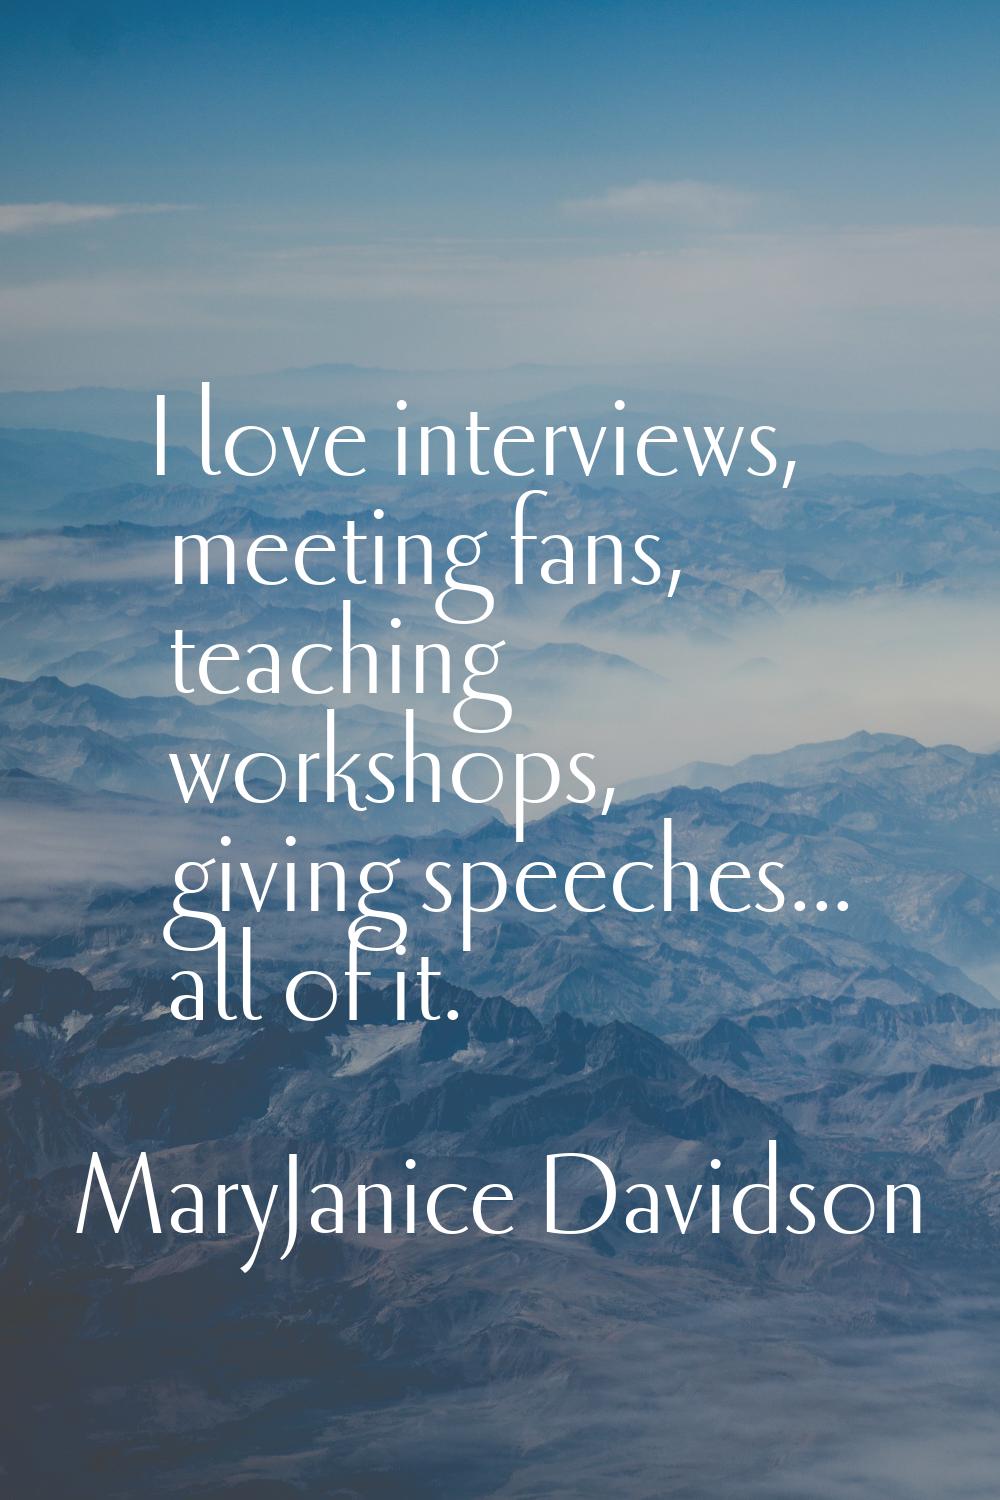 I love interviews, meeting fans, teaching workshops, giving speeches... all of it.